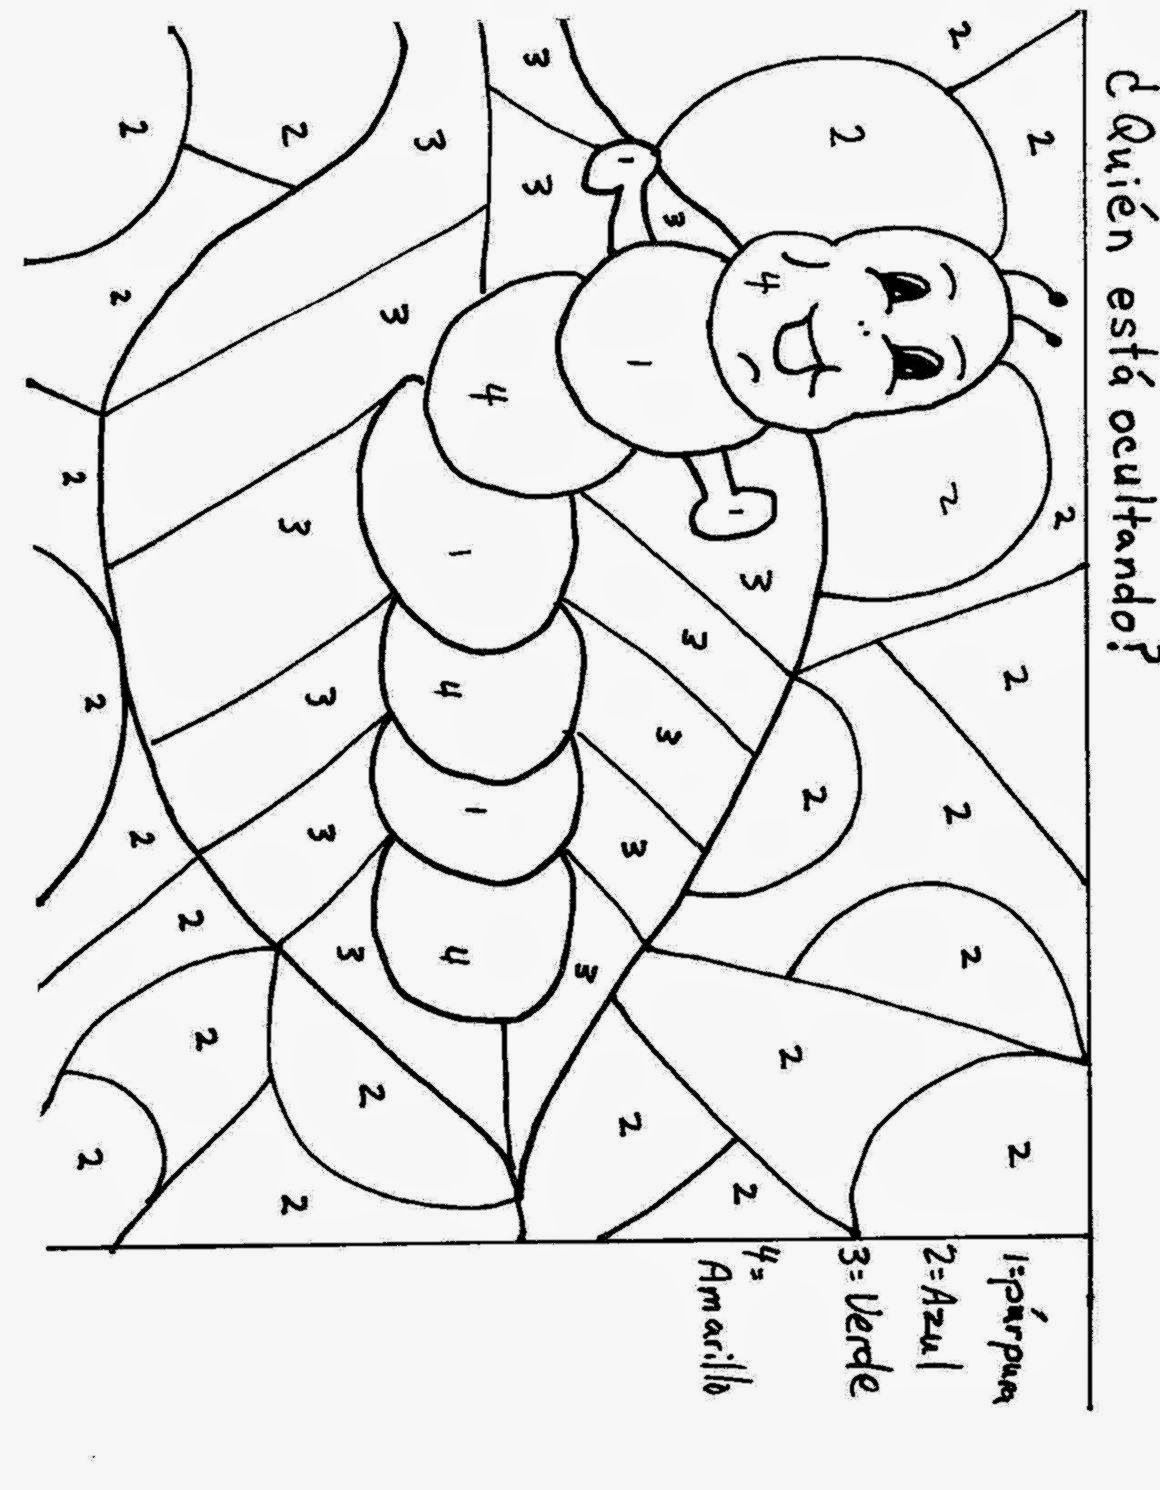 Coloring Pages For Colors In Spanish - Coloring